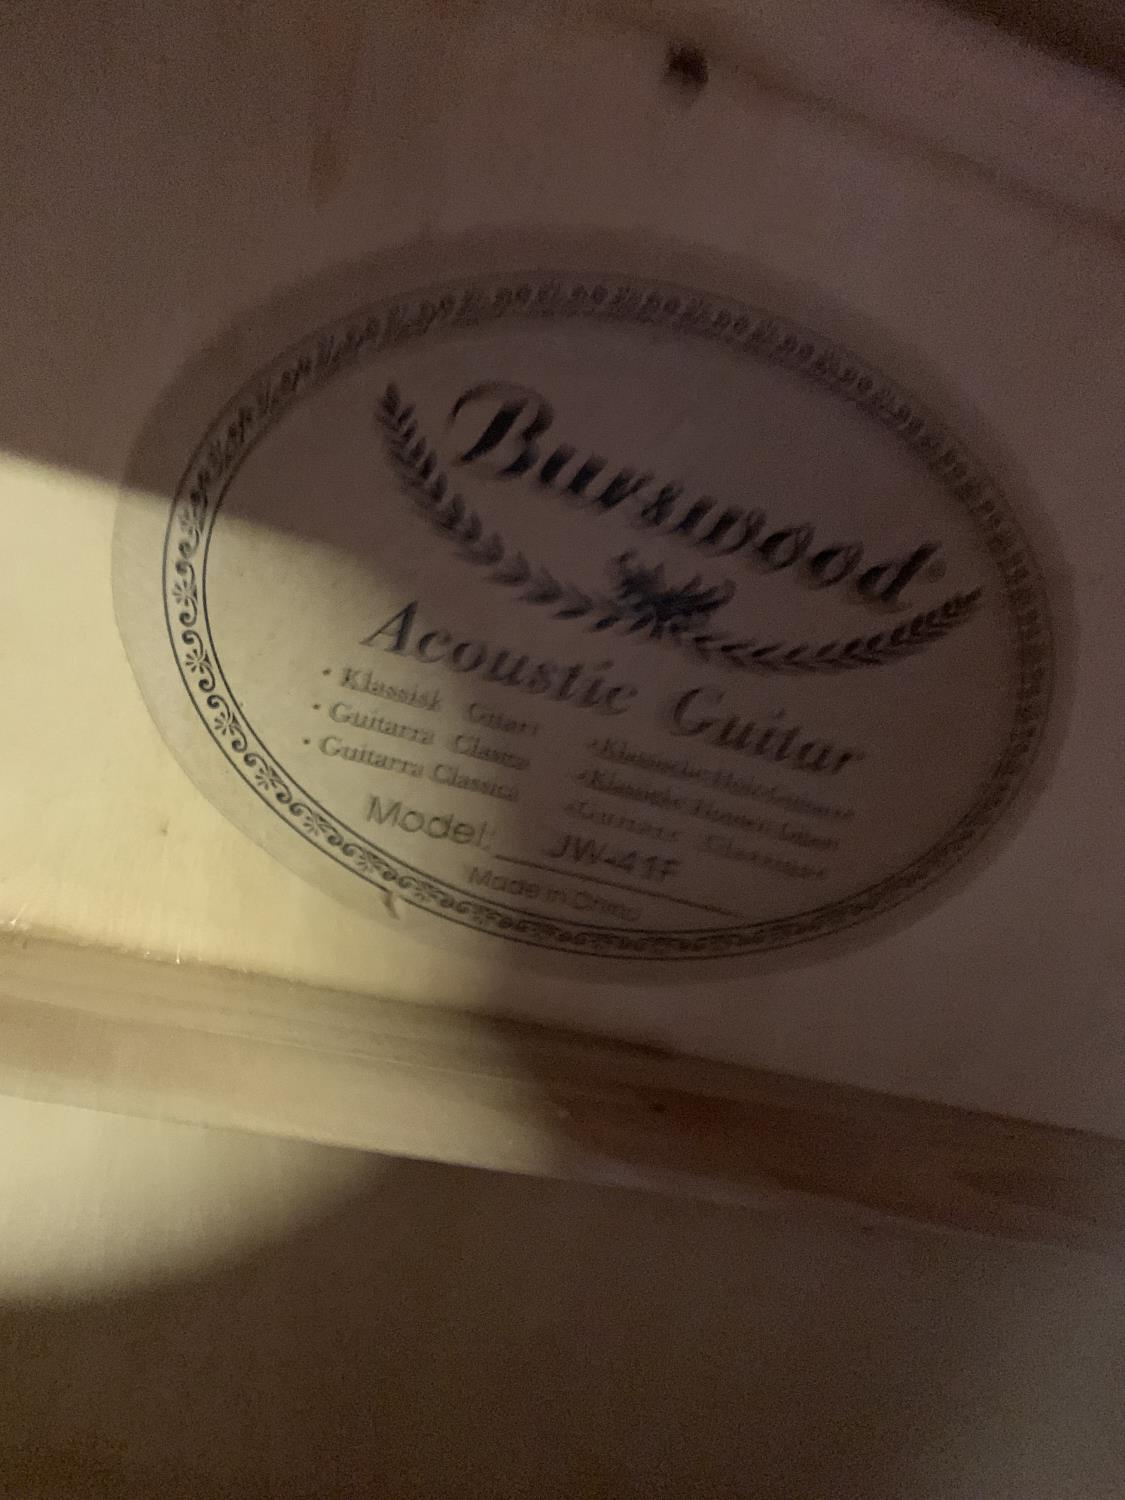 A BURSWOOD ACOUSTIC GUITAR - Image 4 of 4